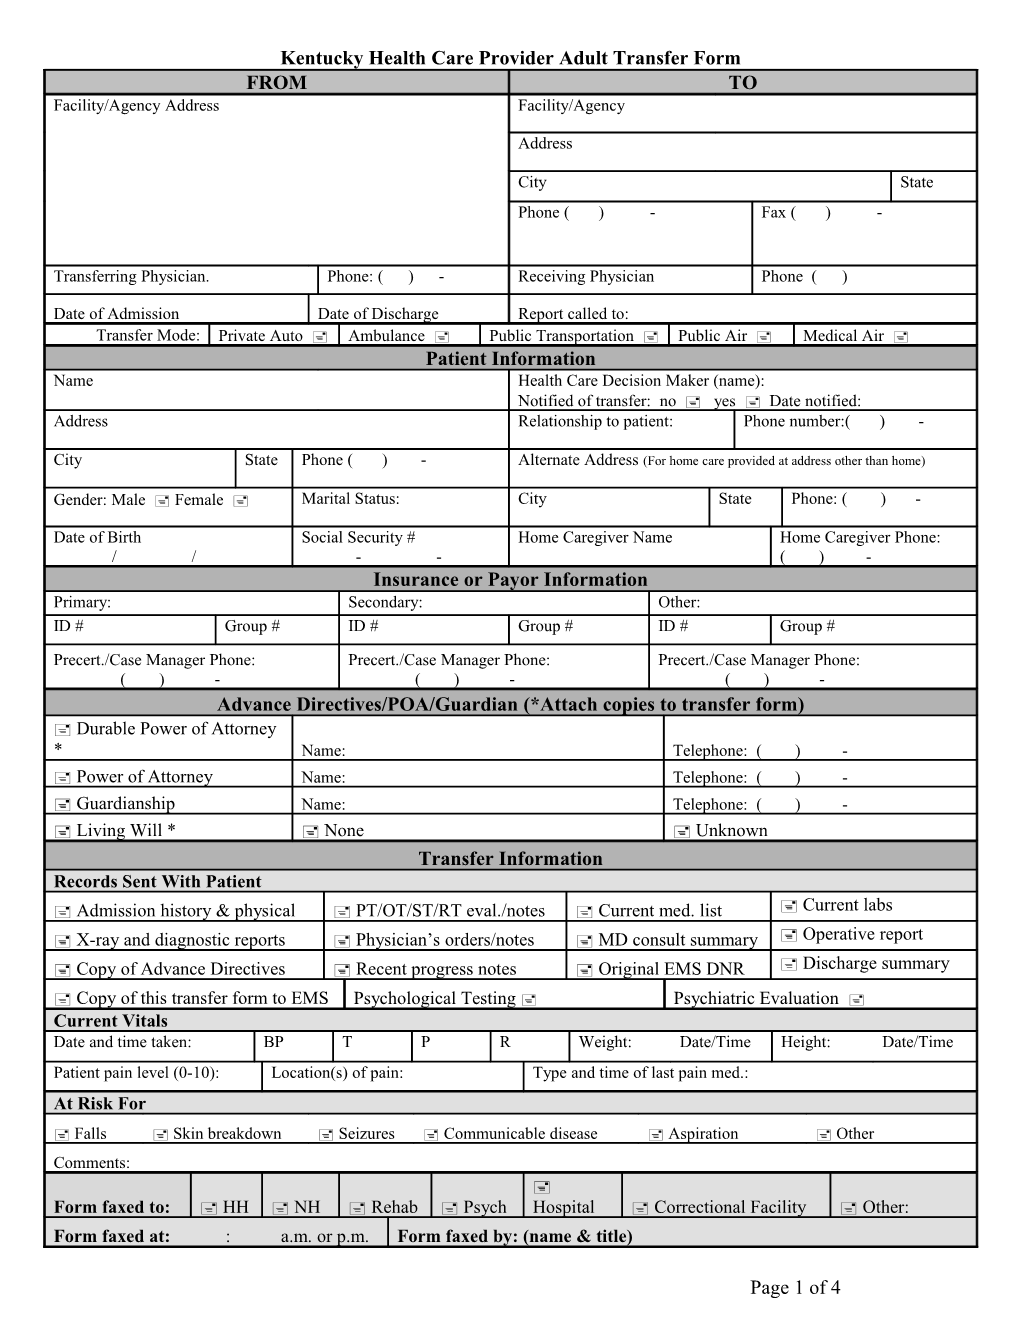 Kentucky Health Care Provider Adult Transfer Form